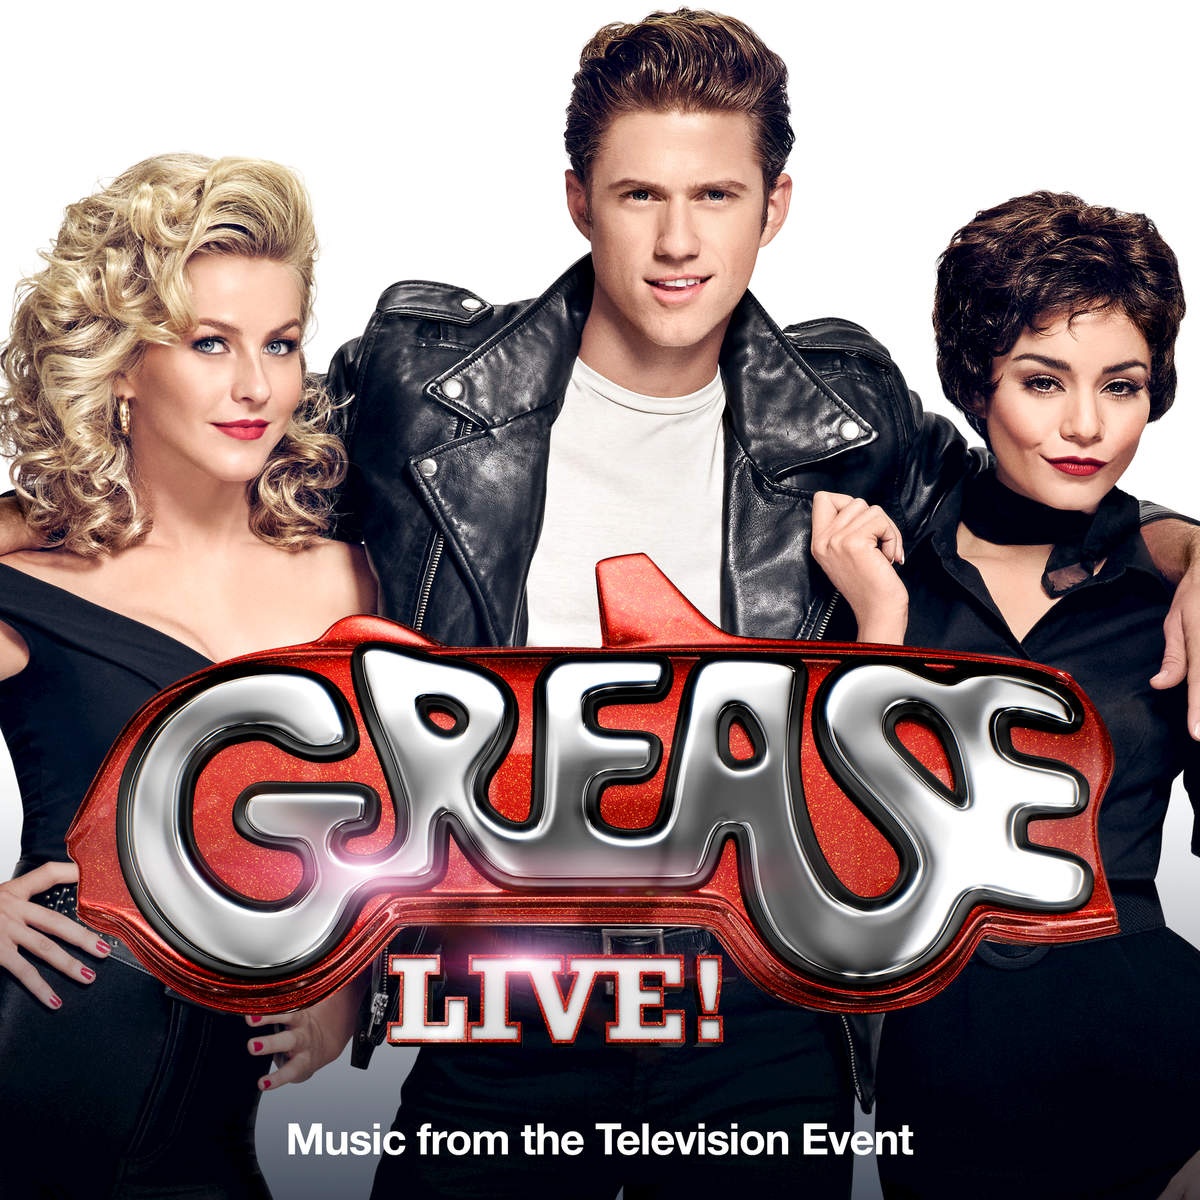 Sandy - From "Grease Live!" Music From The Television Event